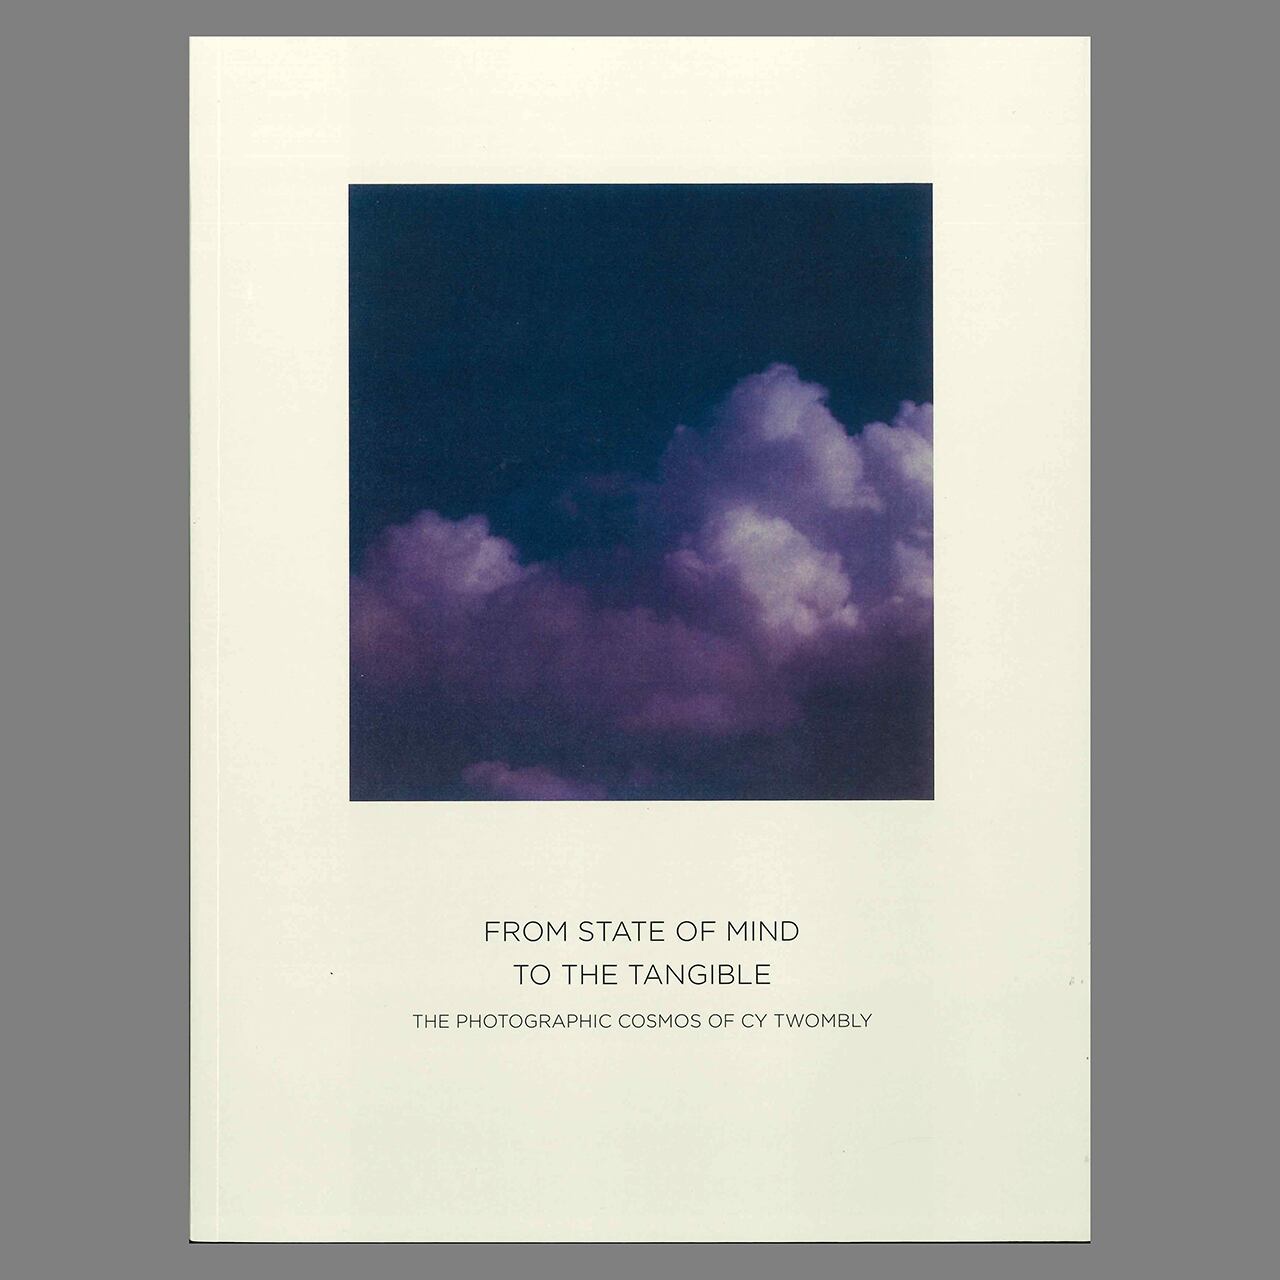 FROM STATE OF MIND TO THE TANGIBLE: THE PHOTOGRAPHIC COSMOS OF CY TWOMBLY